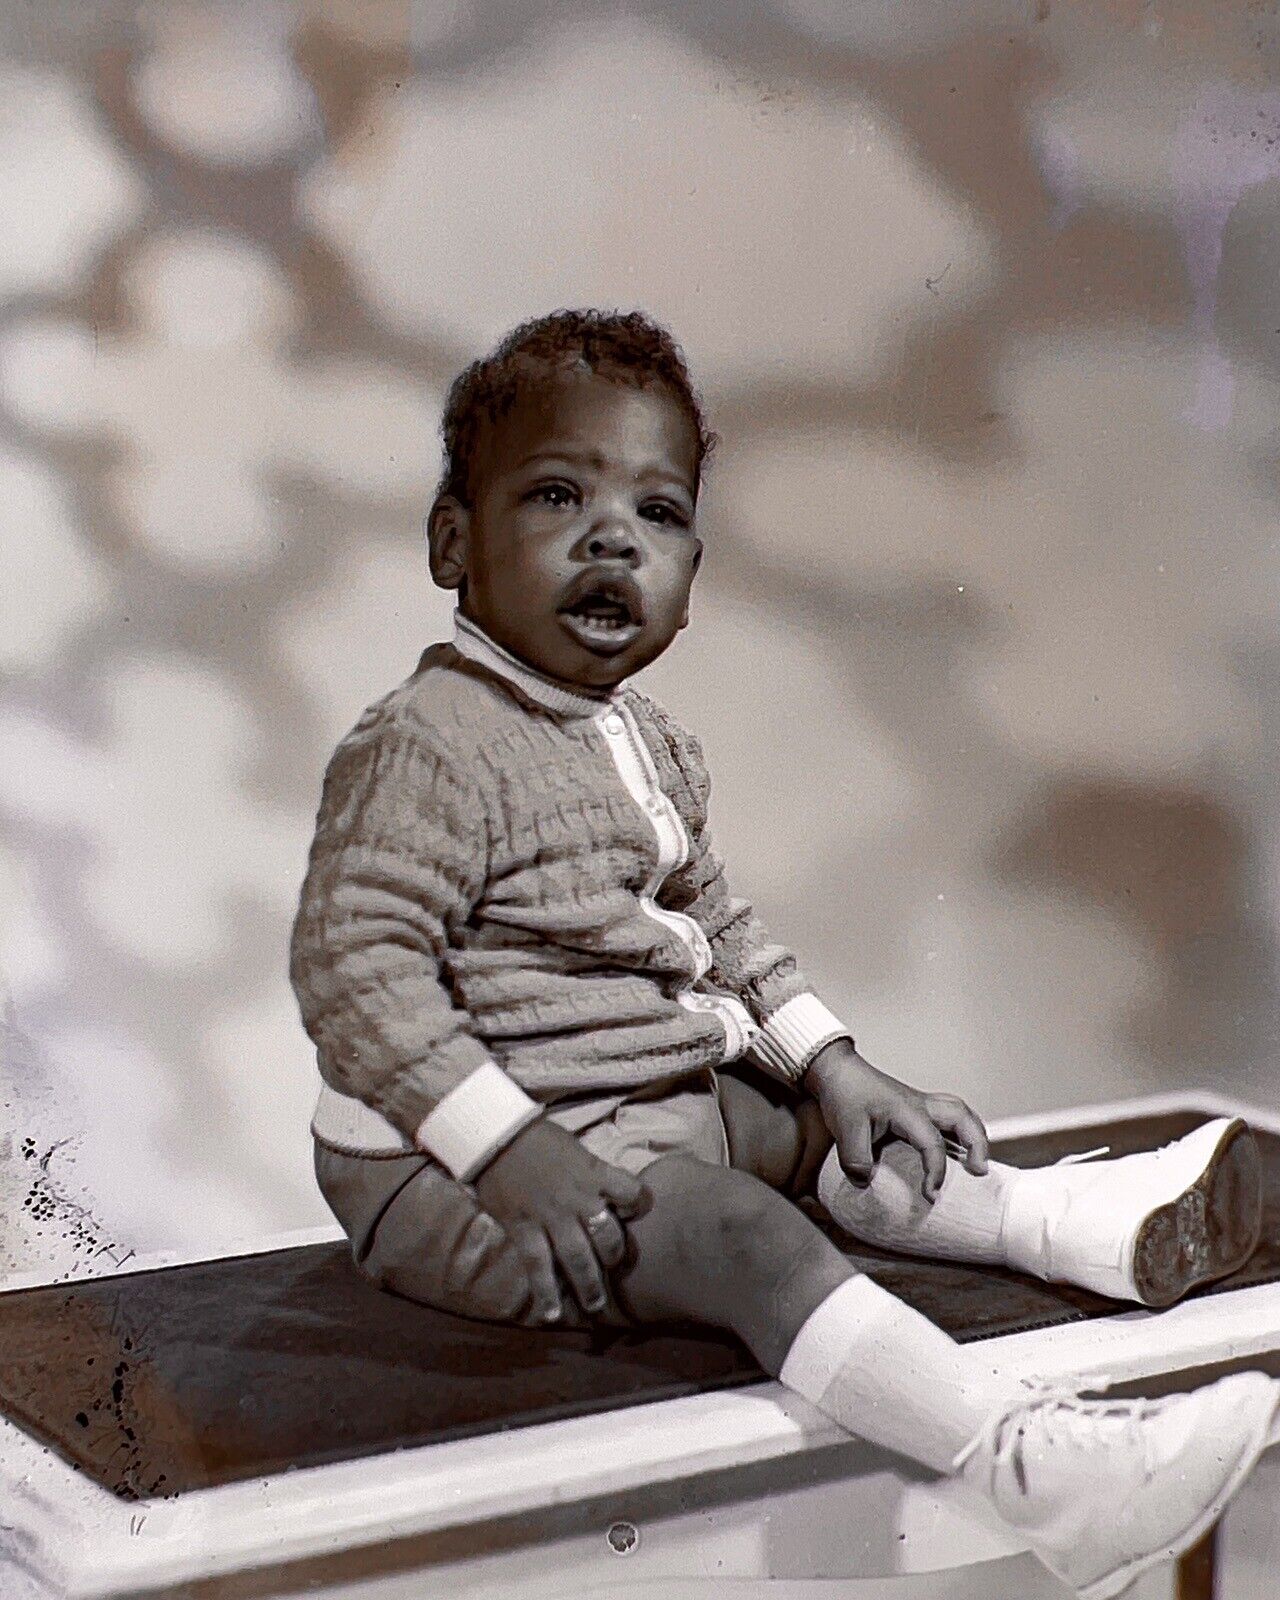 VTG 1950s Photo Negatives Cute Toddler African American Black Three Portraits